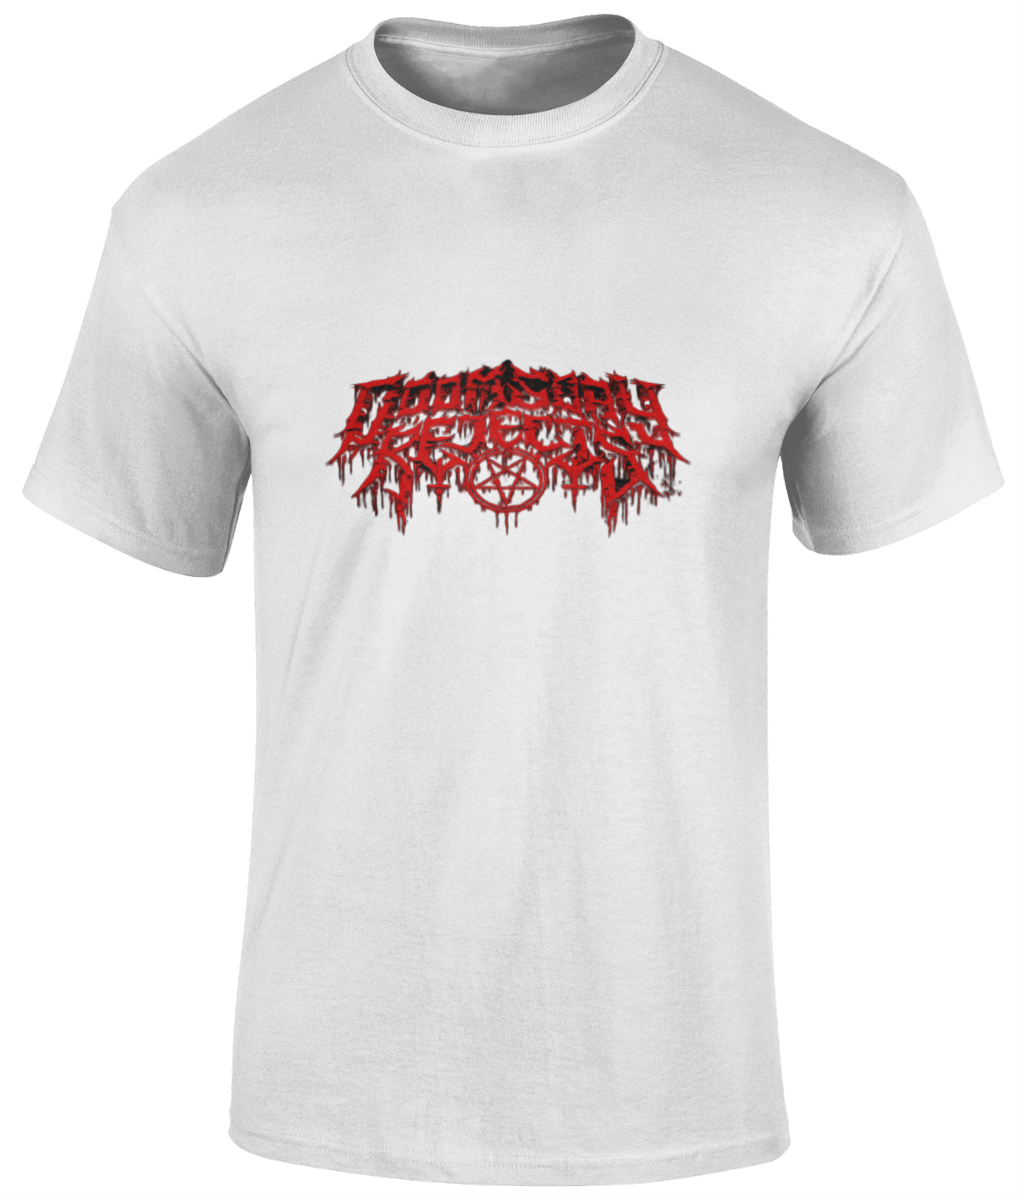 DOOMSDAY REJECTS "RED LOGO" unisex t shirt  Material: 100% cotton.  Seamless twin needle collar. Taped neck and shoulders. Tubular body. Twin needle sleeves and hem. Colours: Black, White Sizes small to 5XL